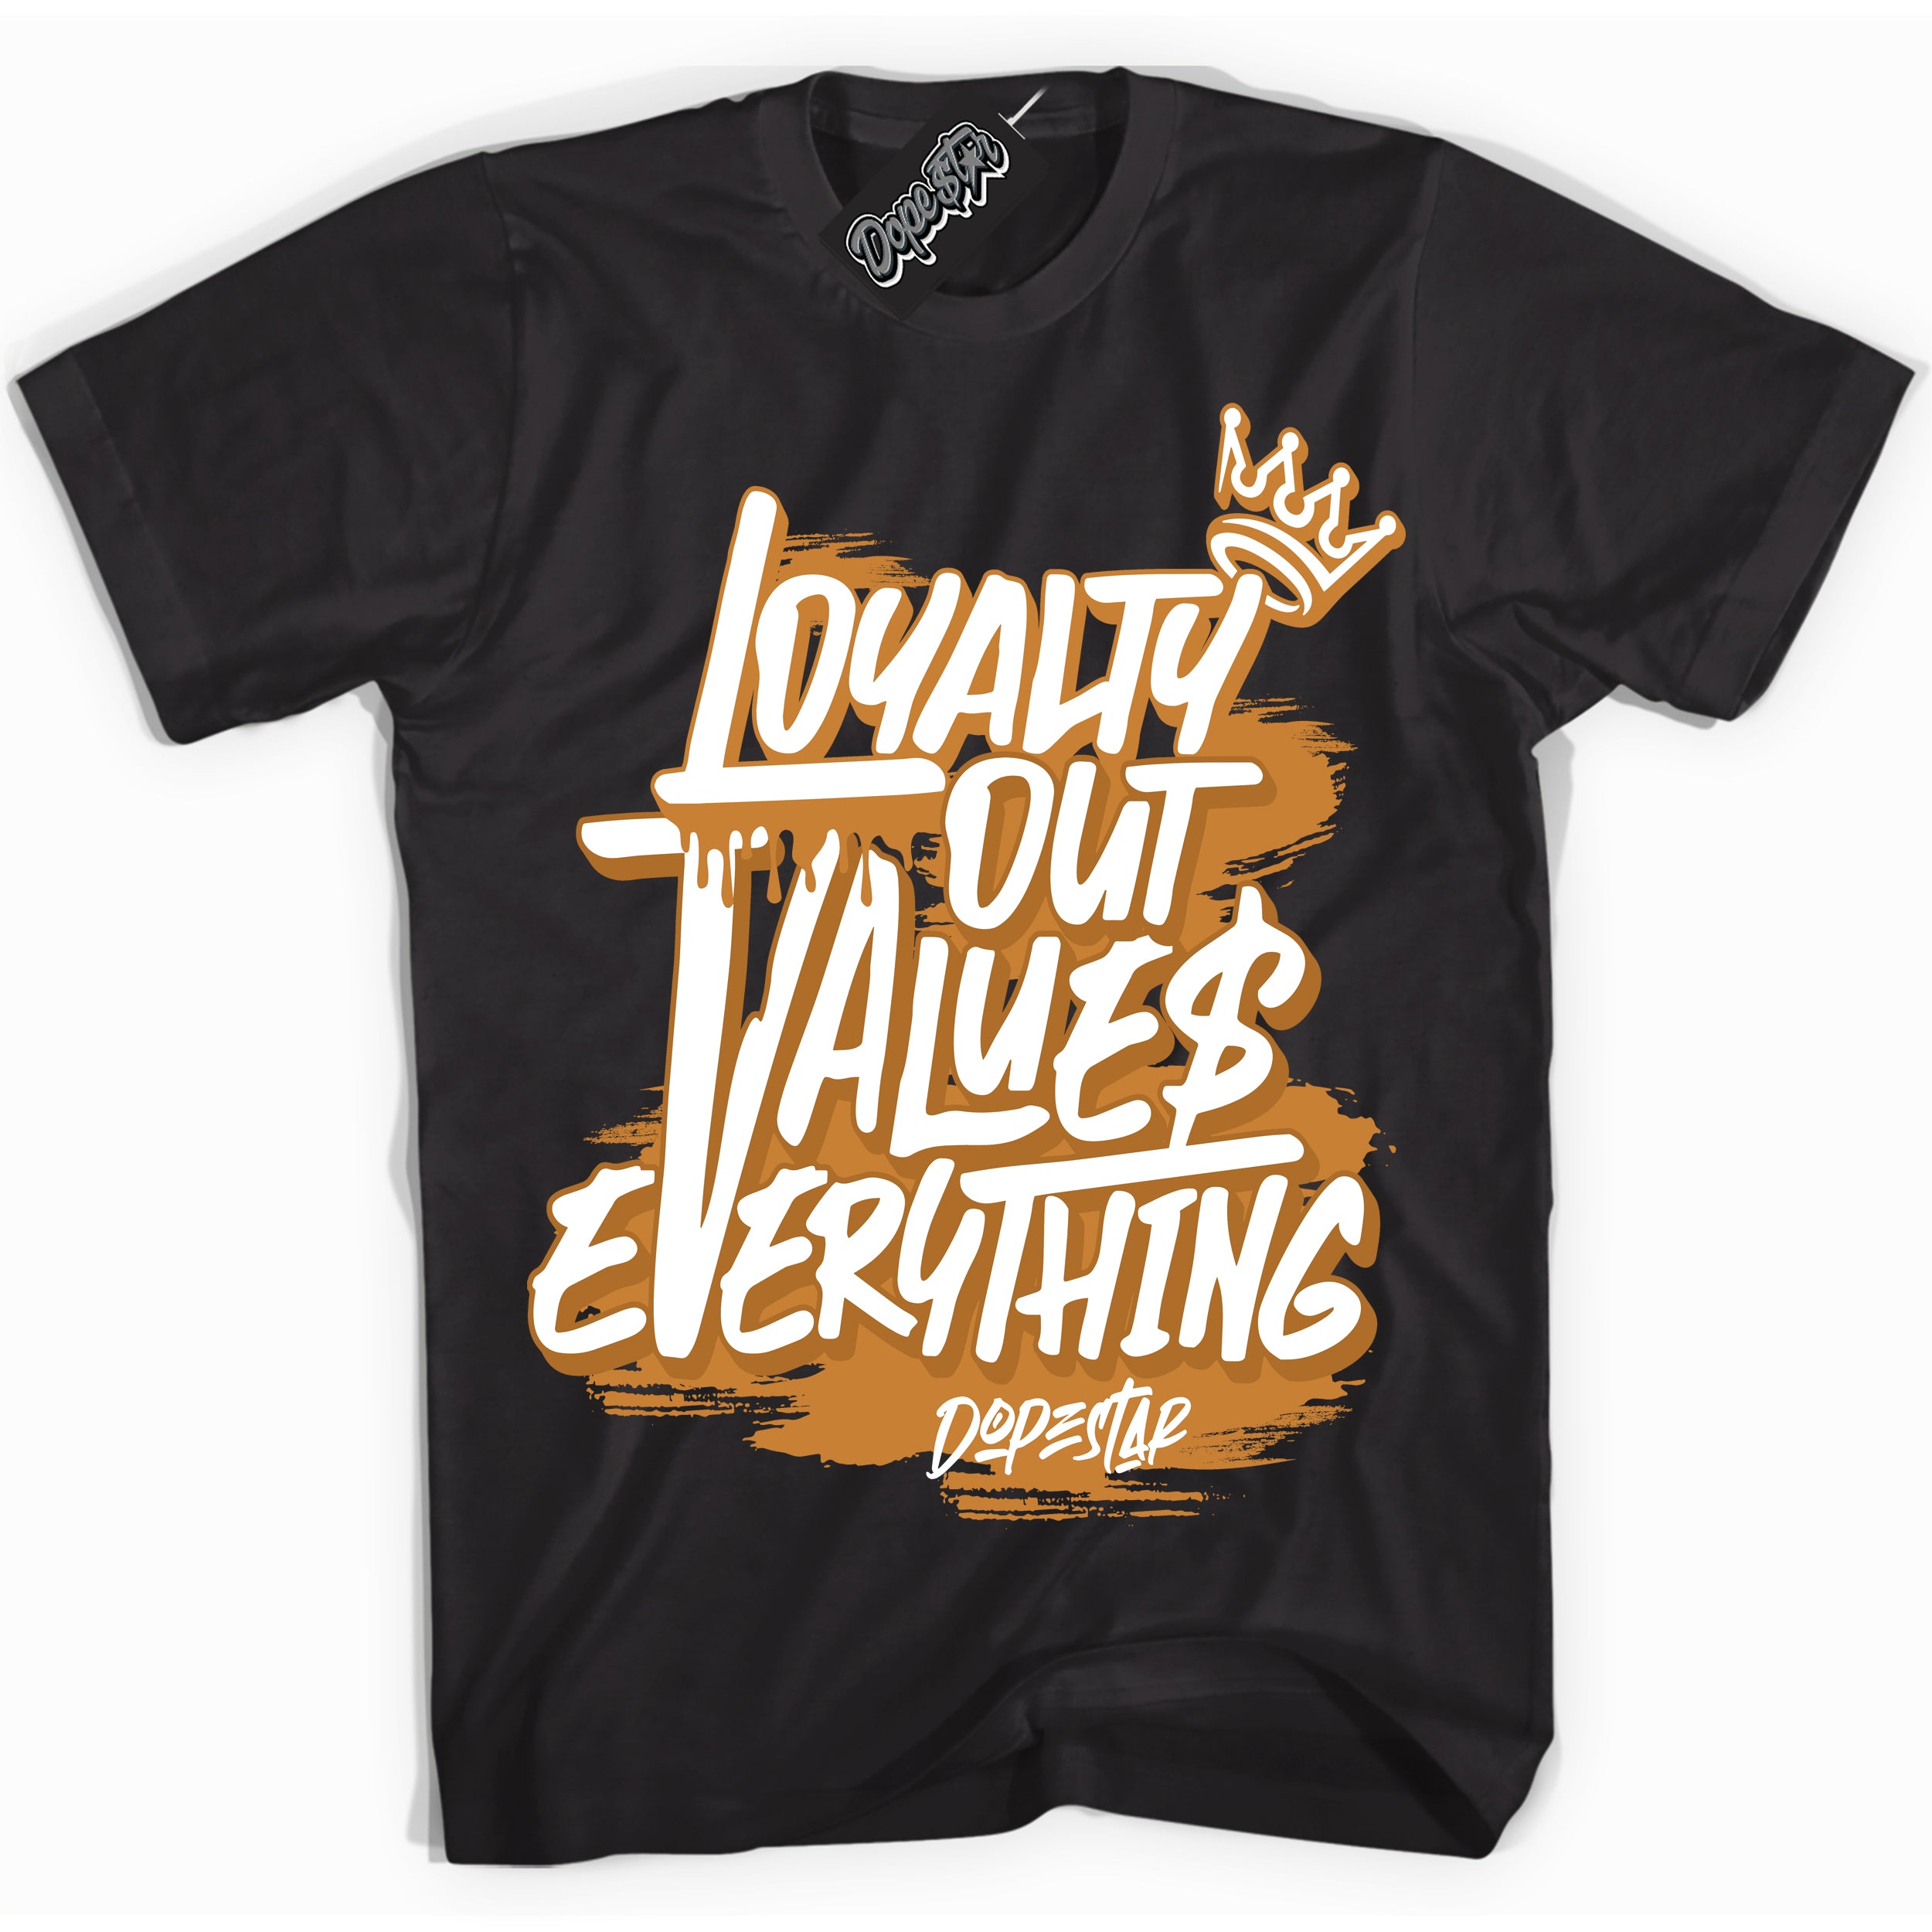 Cool Black Shirt with “ Loyalty Out Values Everything” design that perfectly matches QS CO.JP Reverse Curry 2024 Sneakers.